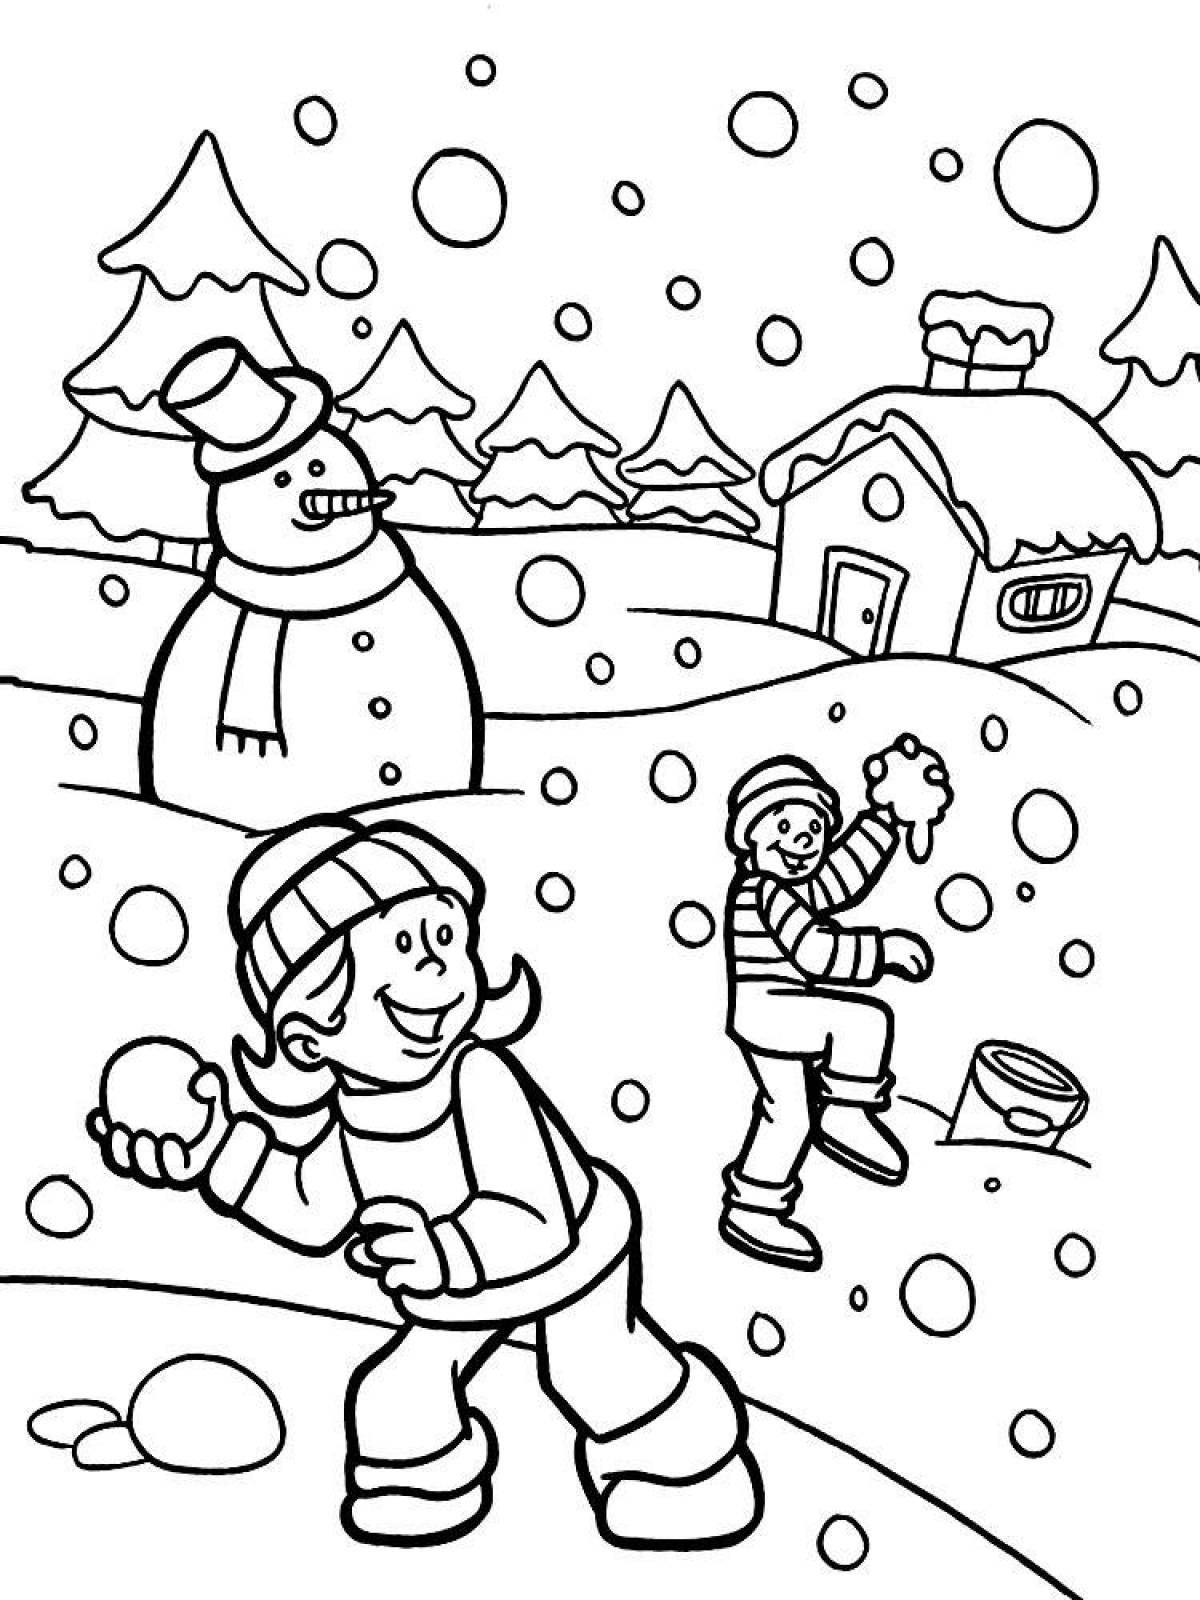 Charming winter coloring book for children 4-5 years old